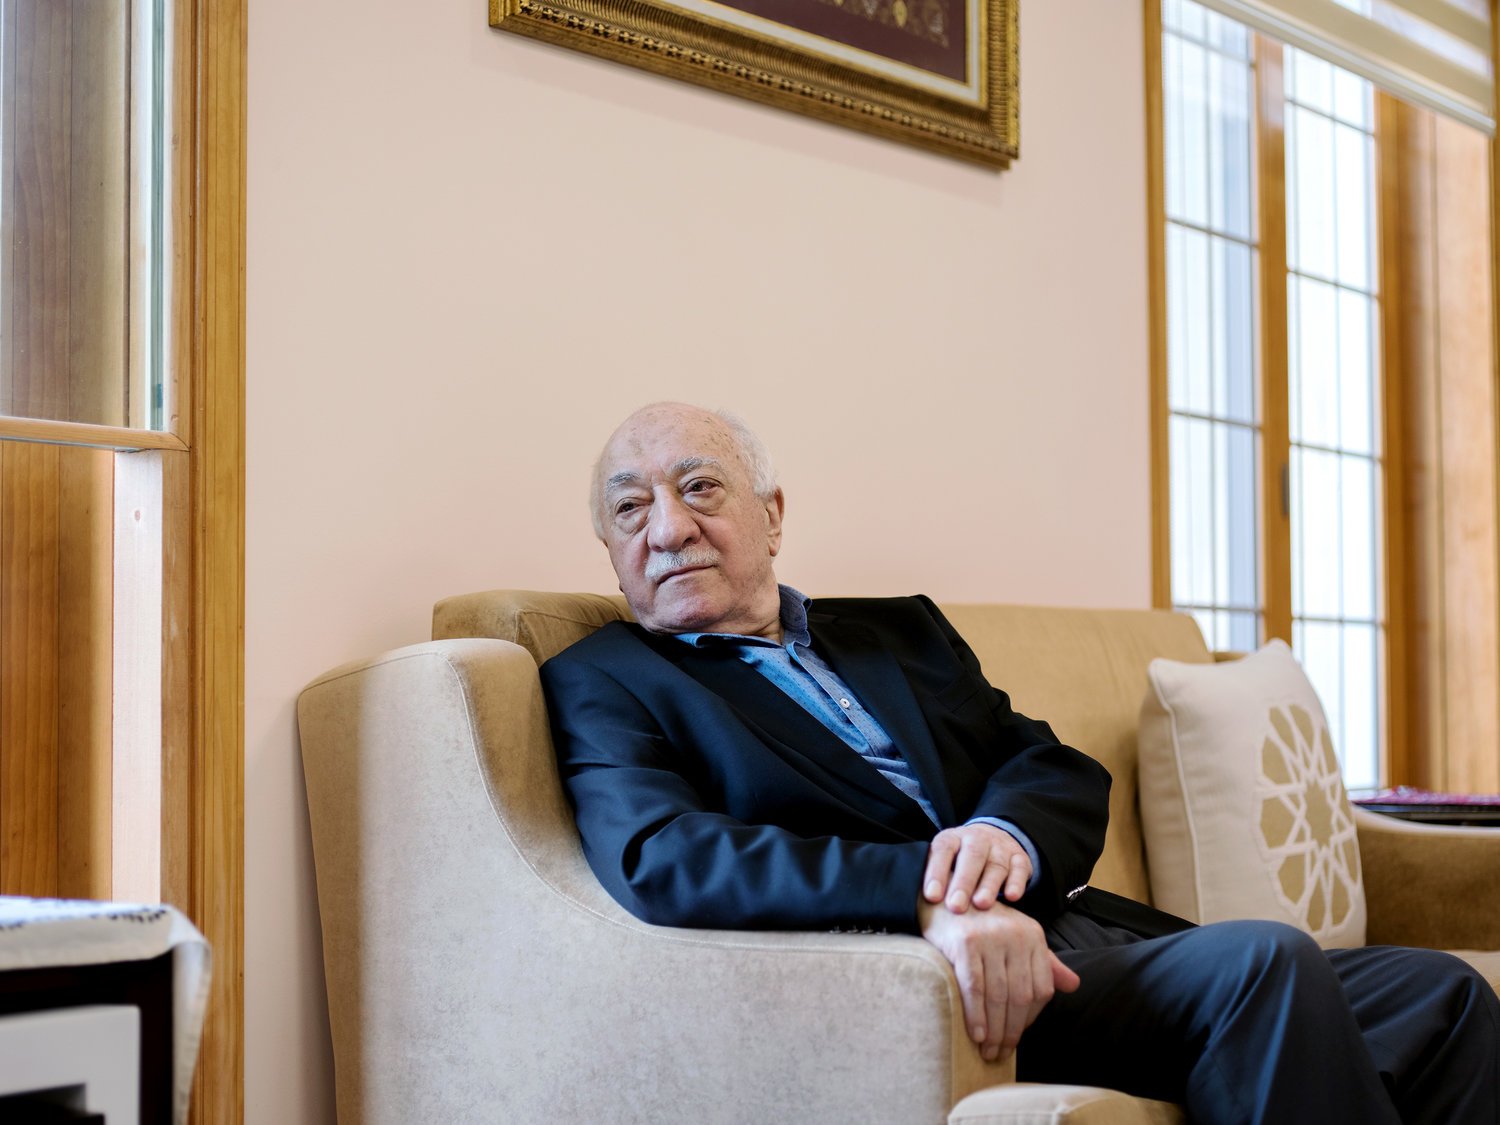 Fethullah Gulen sits in a room at his compound in Saylorsburg, Pennsylvania. He has lived in exile in the United States since the late 1990s. Turkish President Recep Tayyip Erdogan blames Gulen for last year's failed coup and is seeking his extradition.
Bryan Thomas for NPR